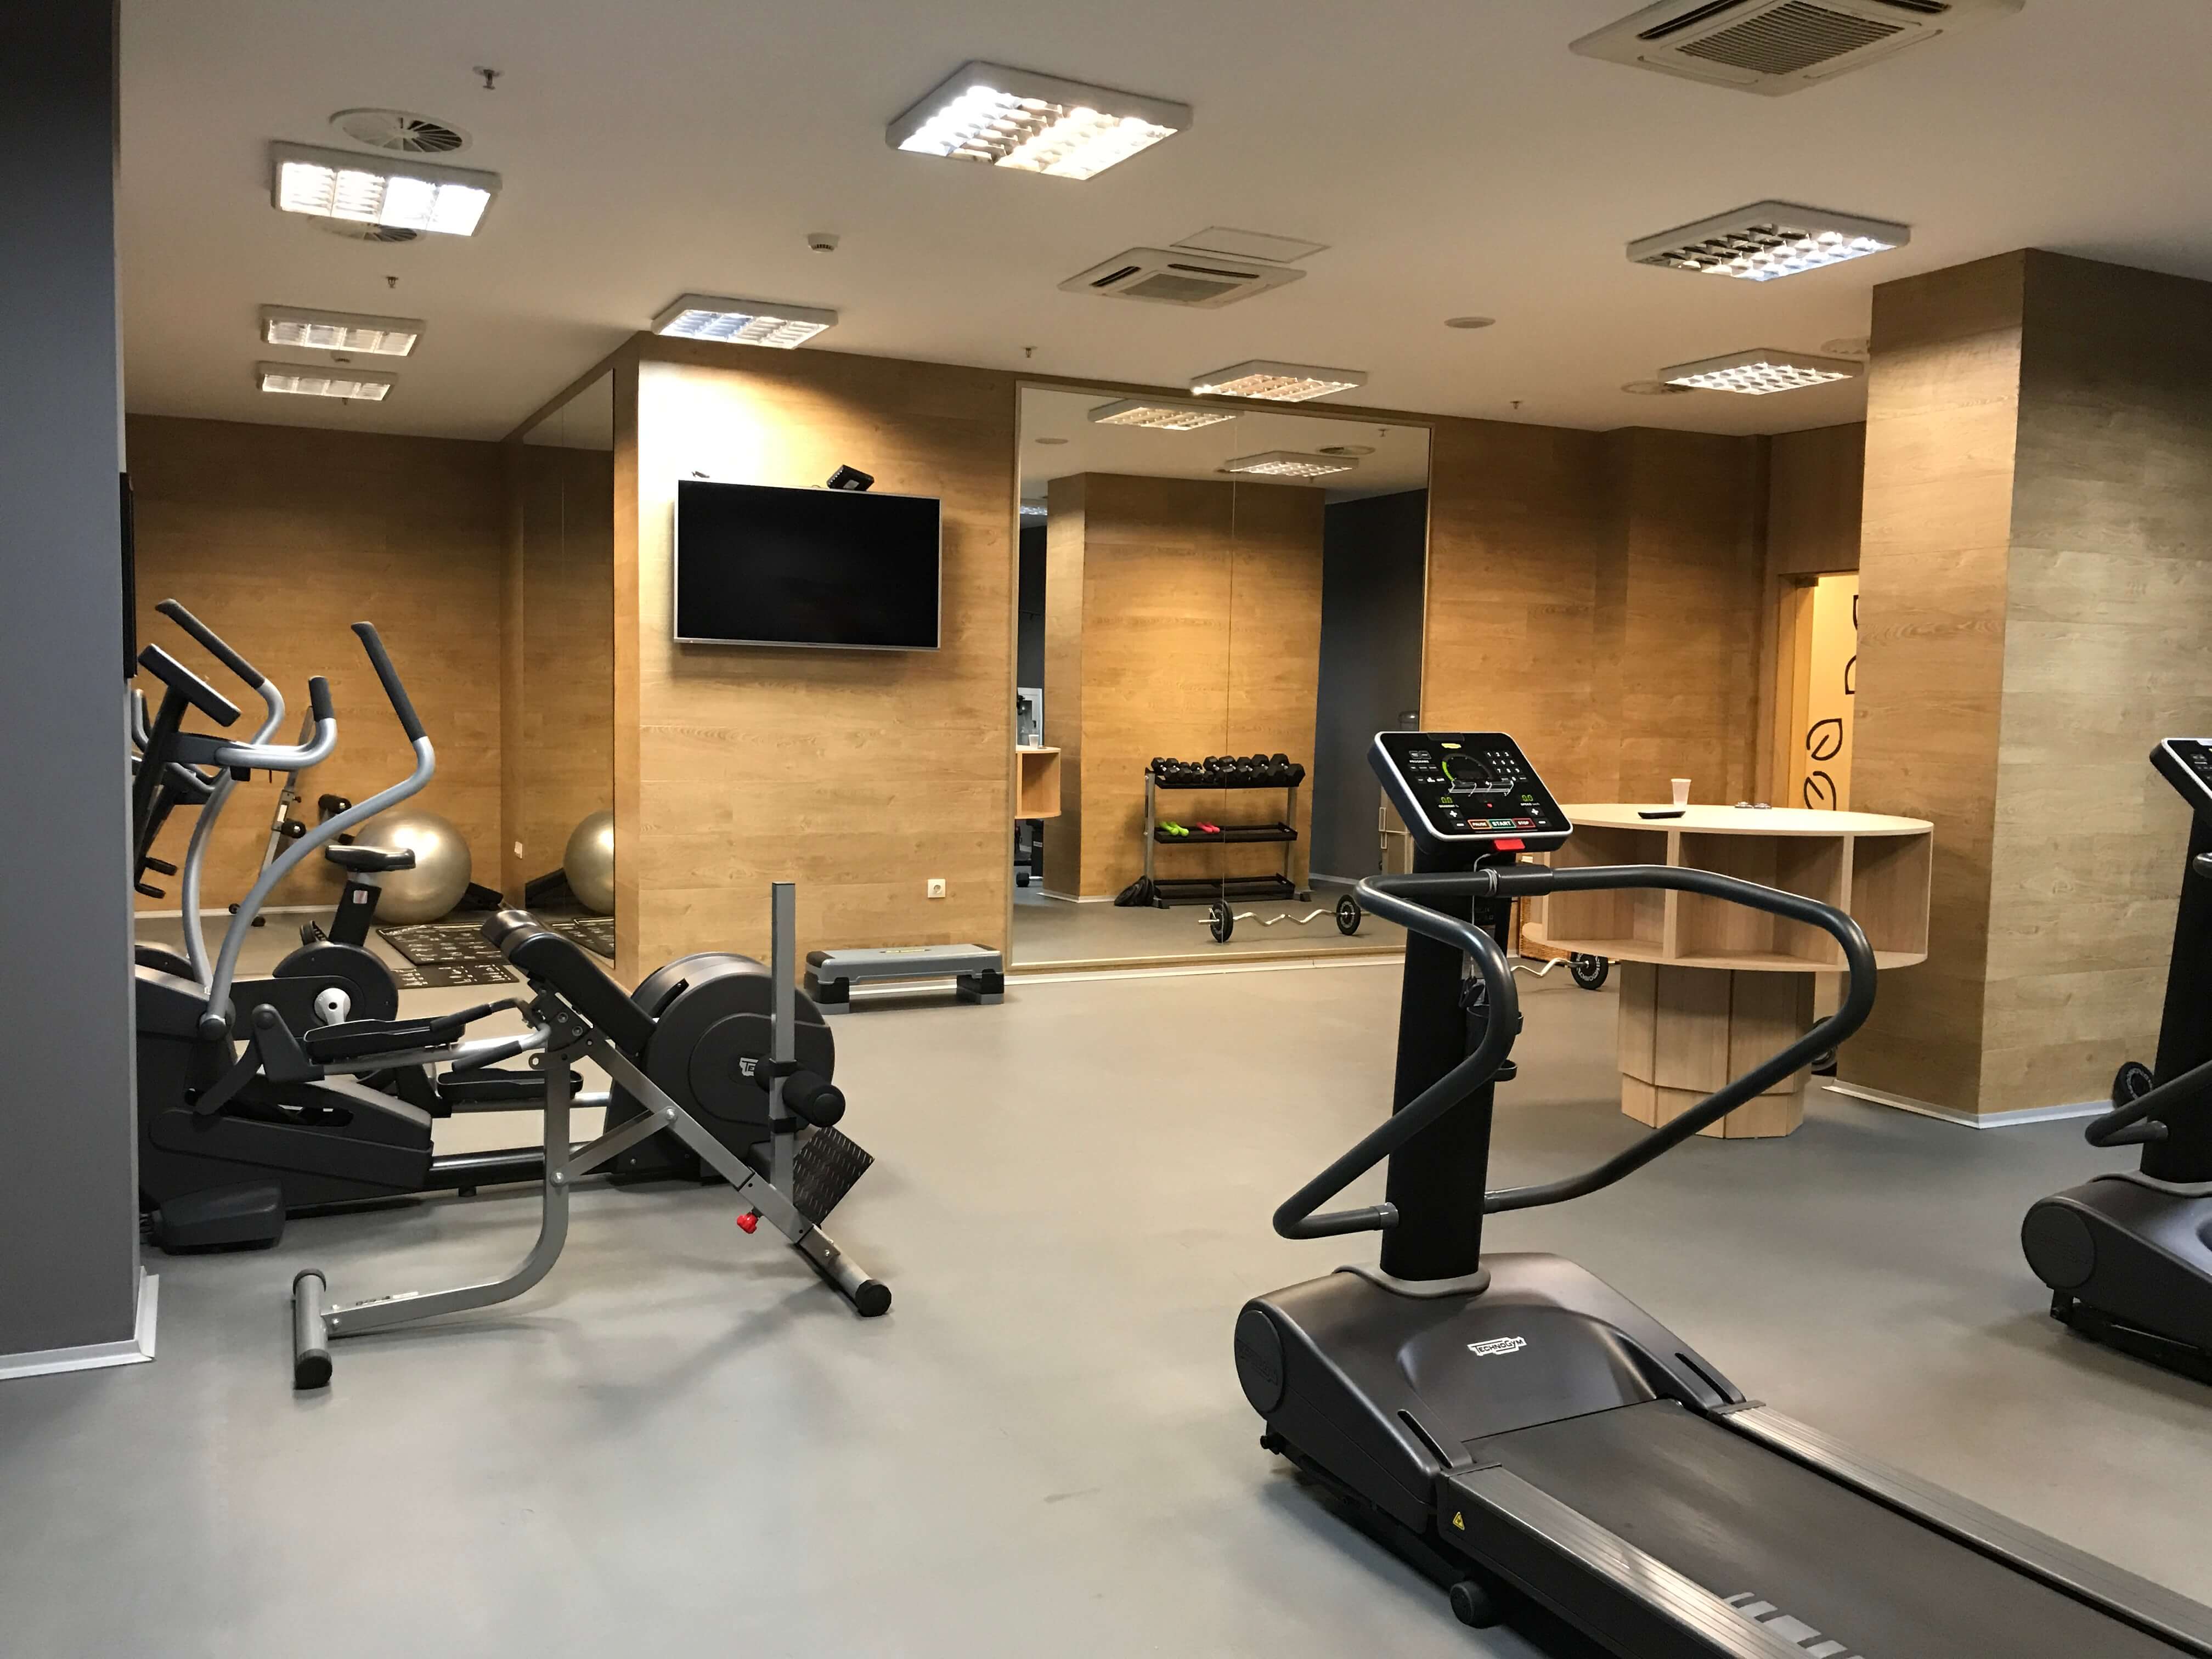 Hotel reviews with 24-hour gym